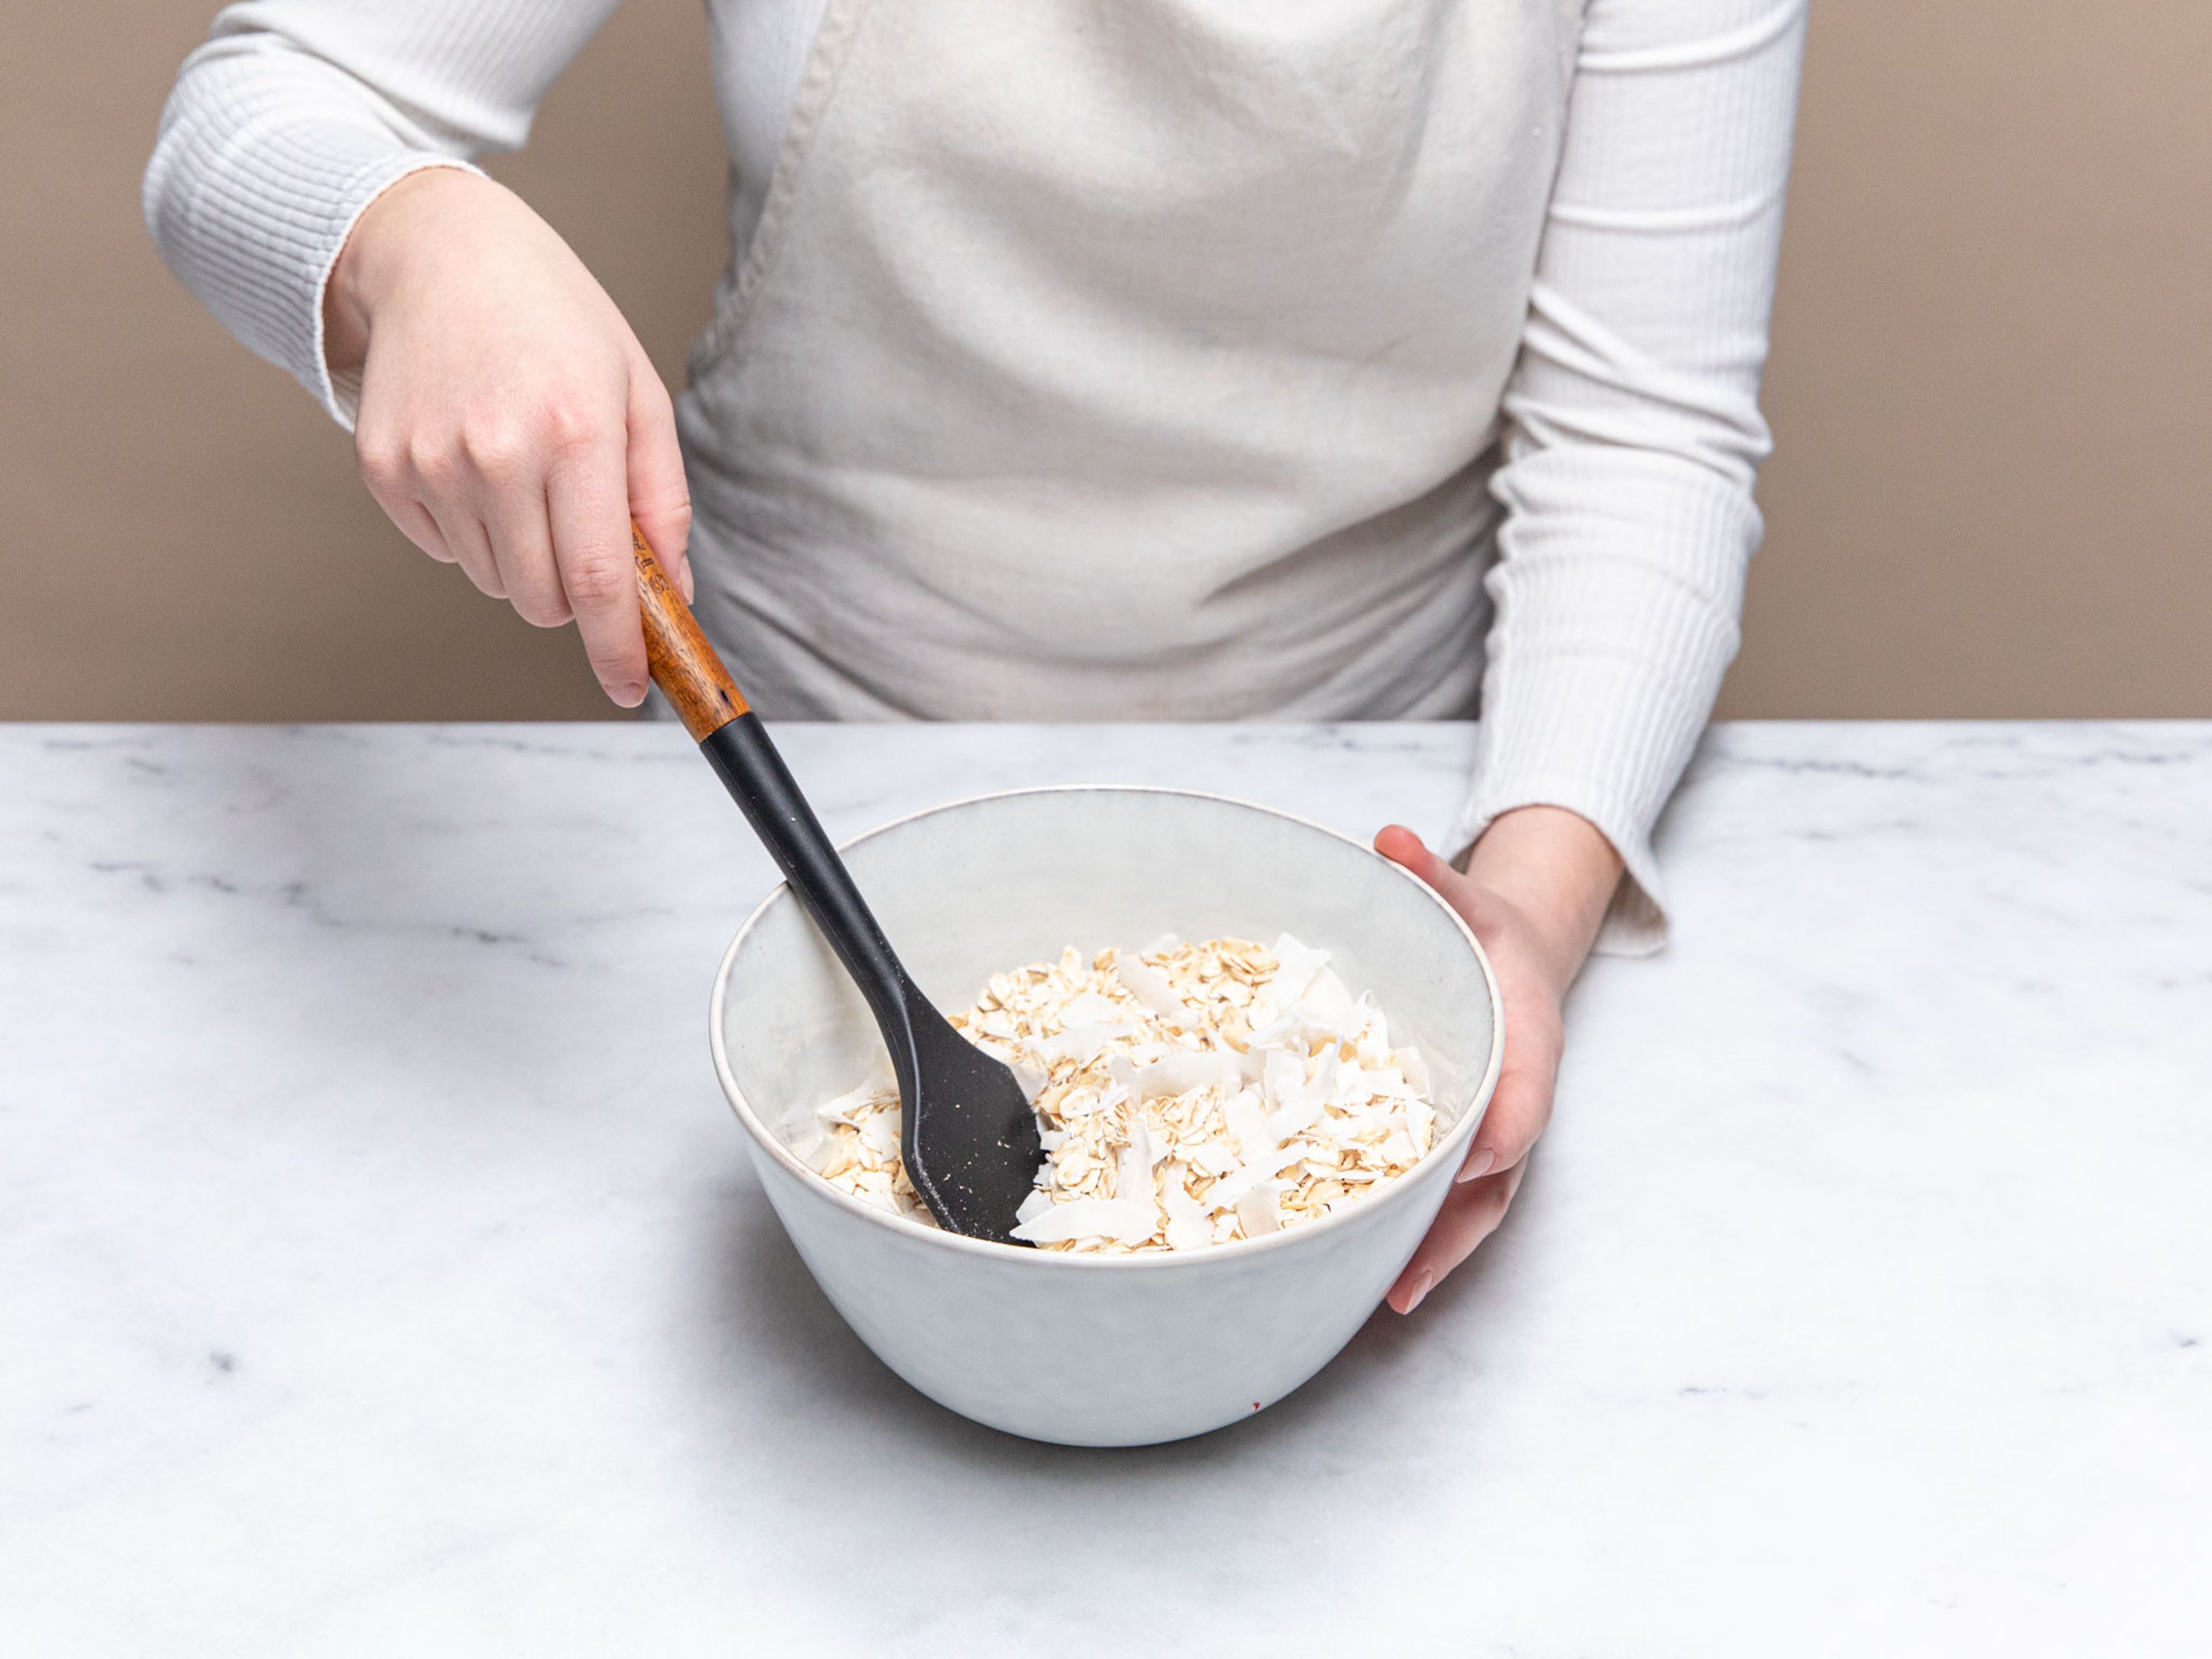 Mix oats, chopped almonds, coconut flakes and salt in a bowl. Add olive oil and maple syrup to the granola mixture. Mix everything well together until all the dry ingredients are glazed with the syrup and oil.